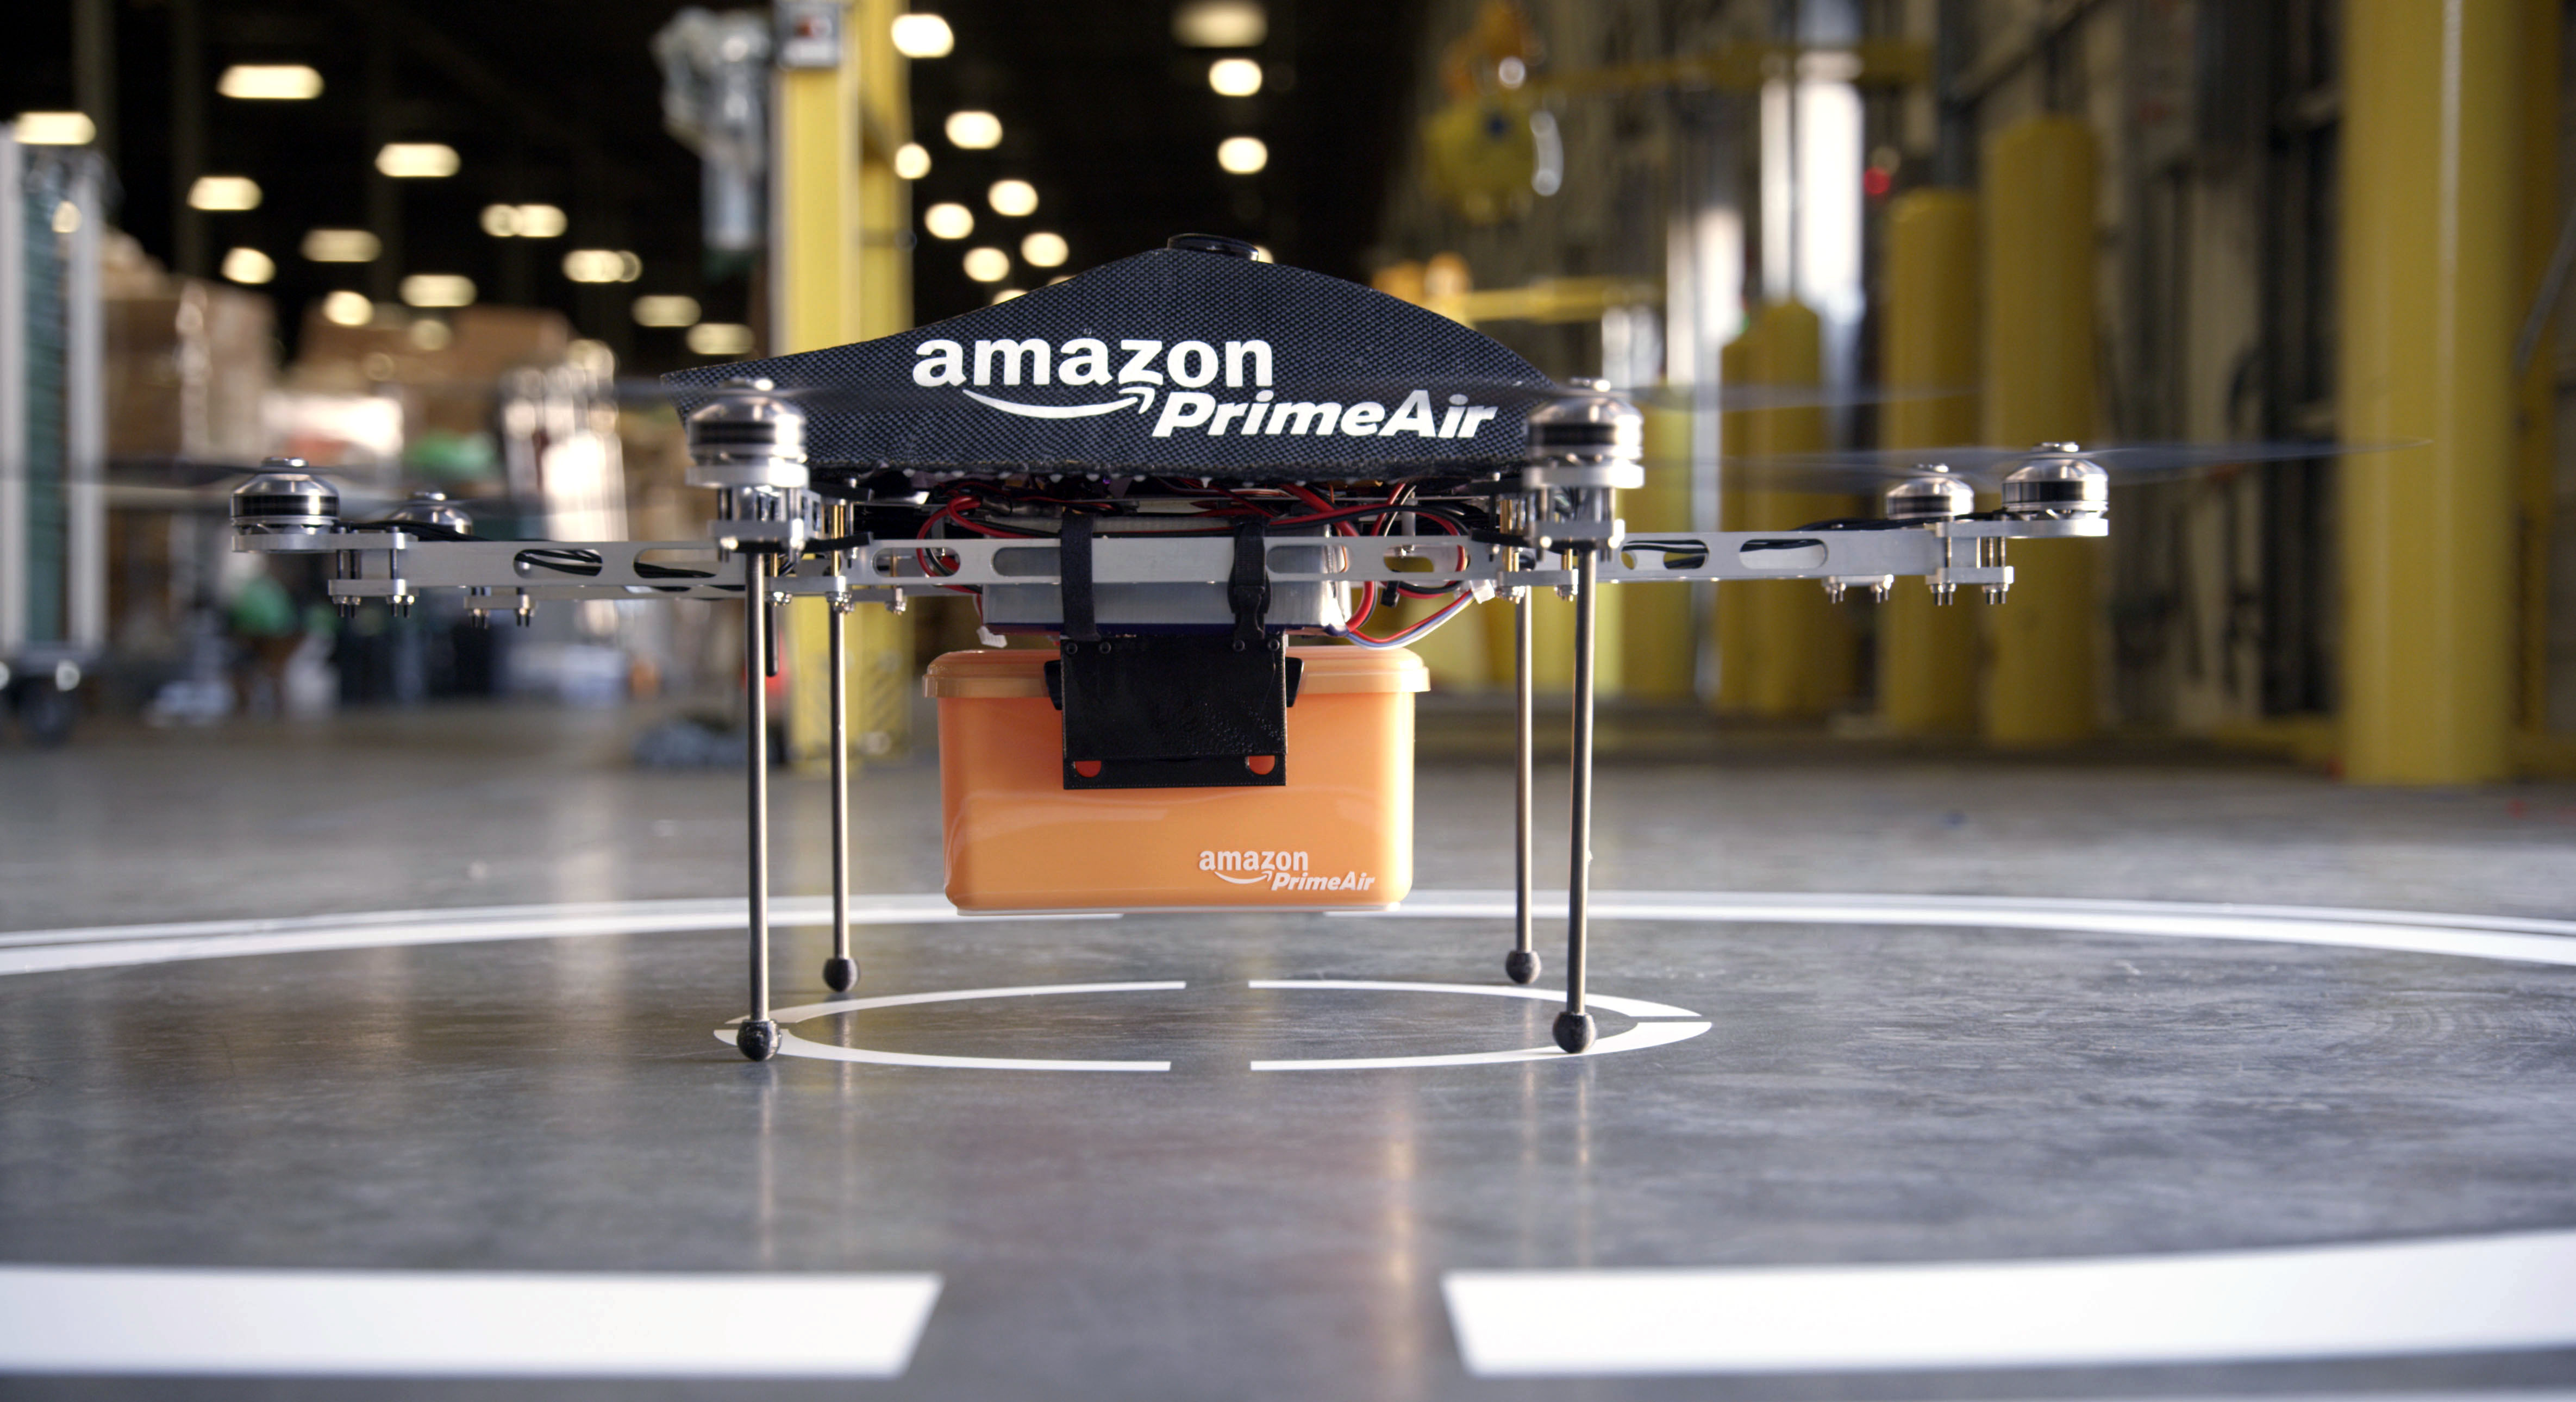 This undated image provided by Amazon.com shows the so-called Prime Air unmanned aircraft project that Amazon is working on in its research and development labs. (AP)